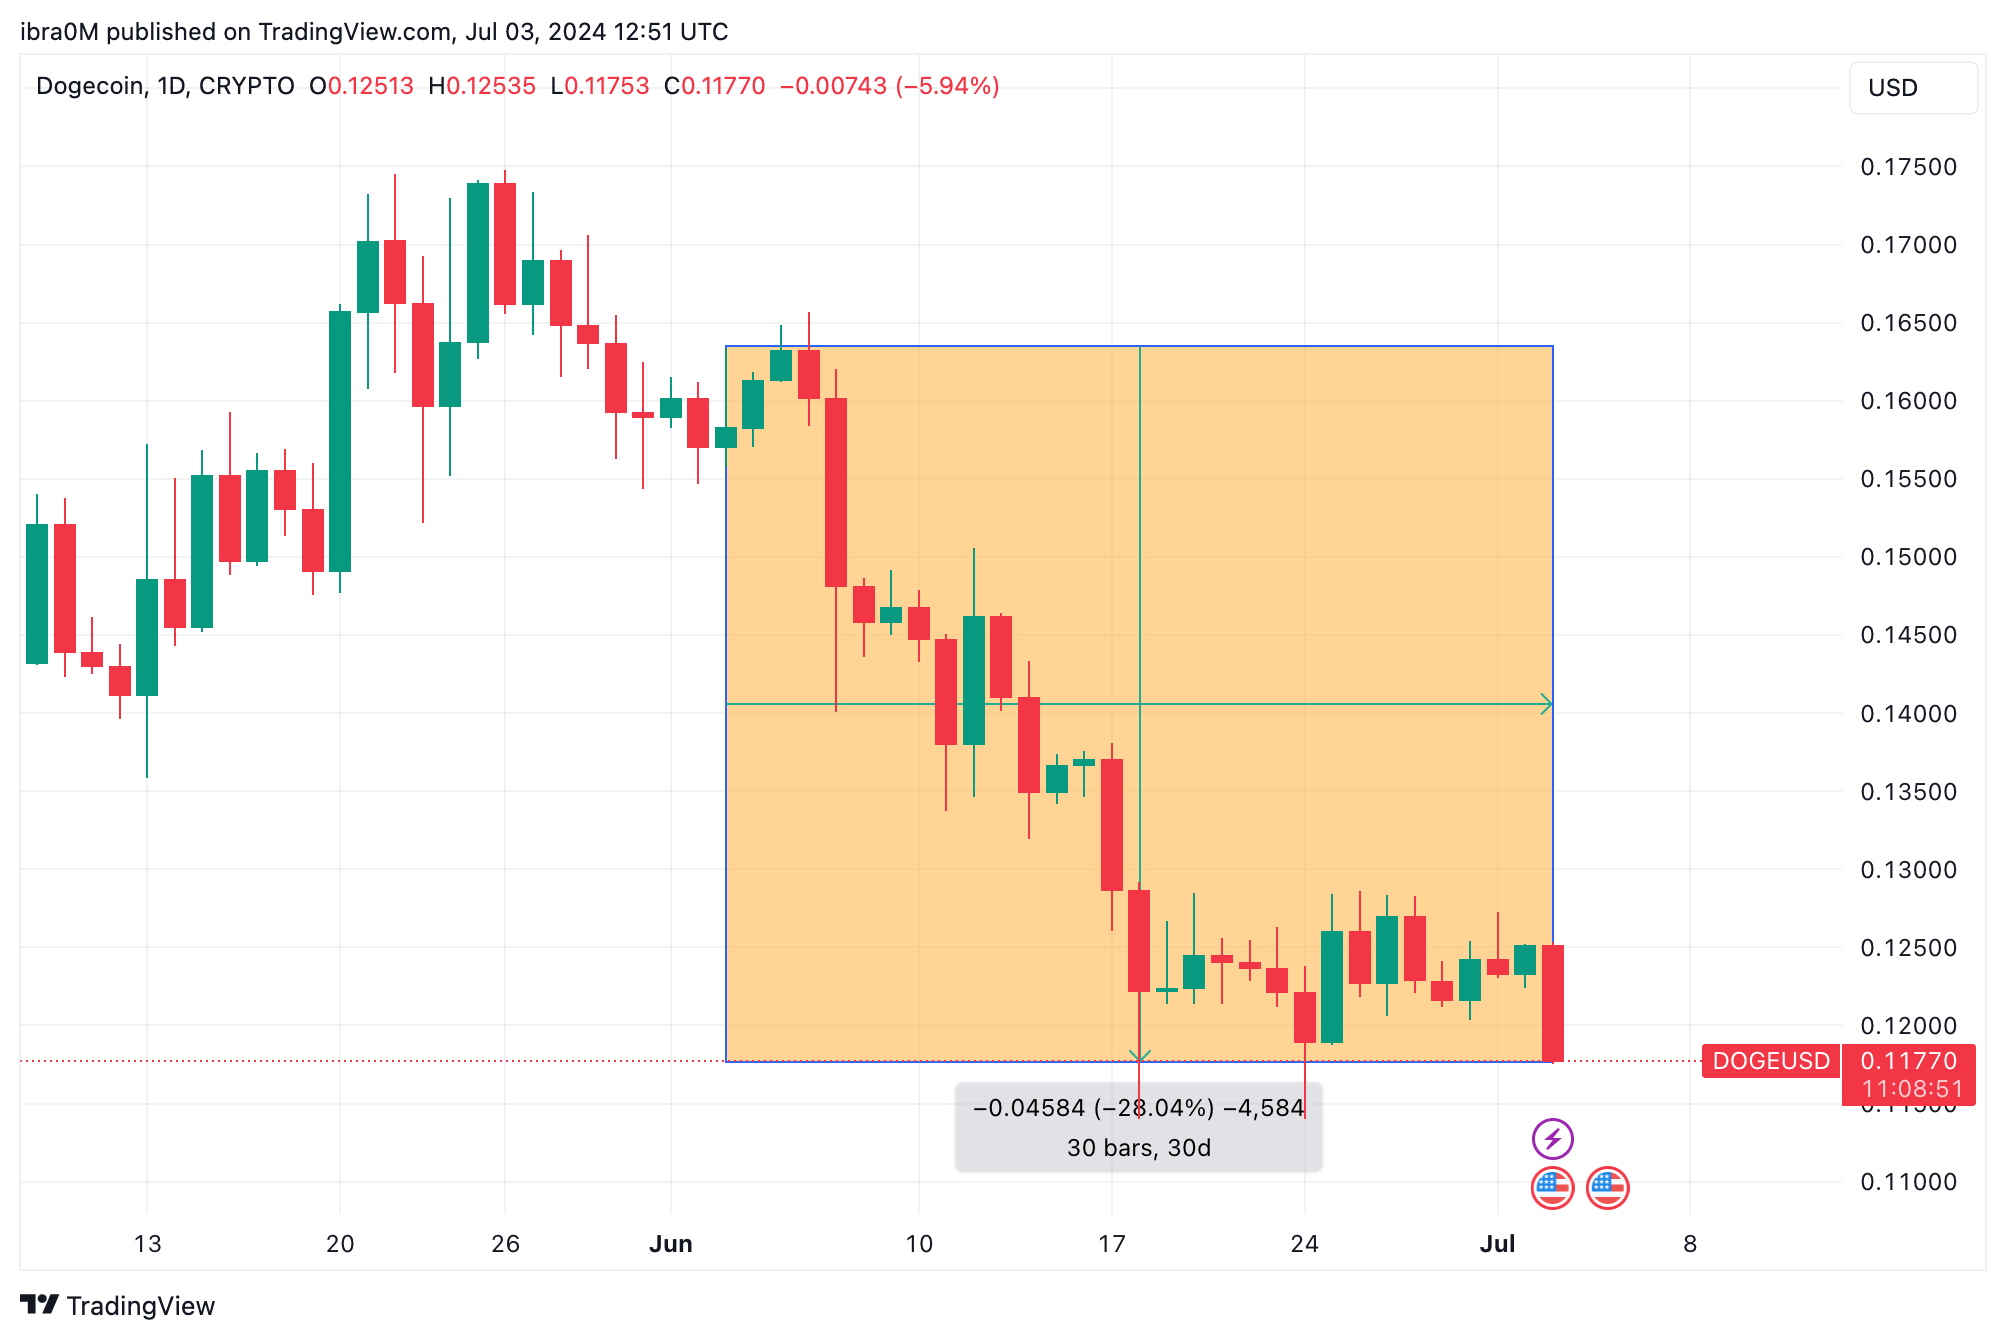  Dogecoin (DOGE) Price Action | DOGE/USD | TradingView